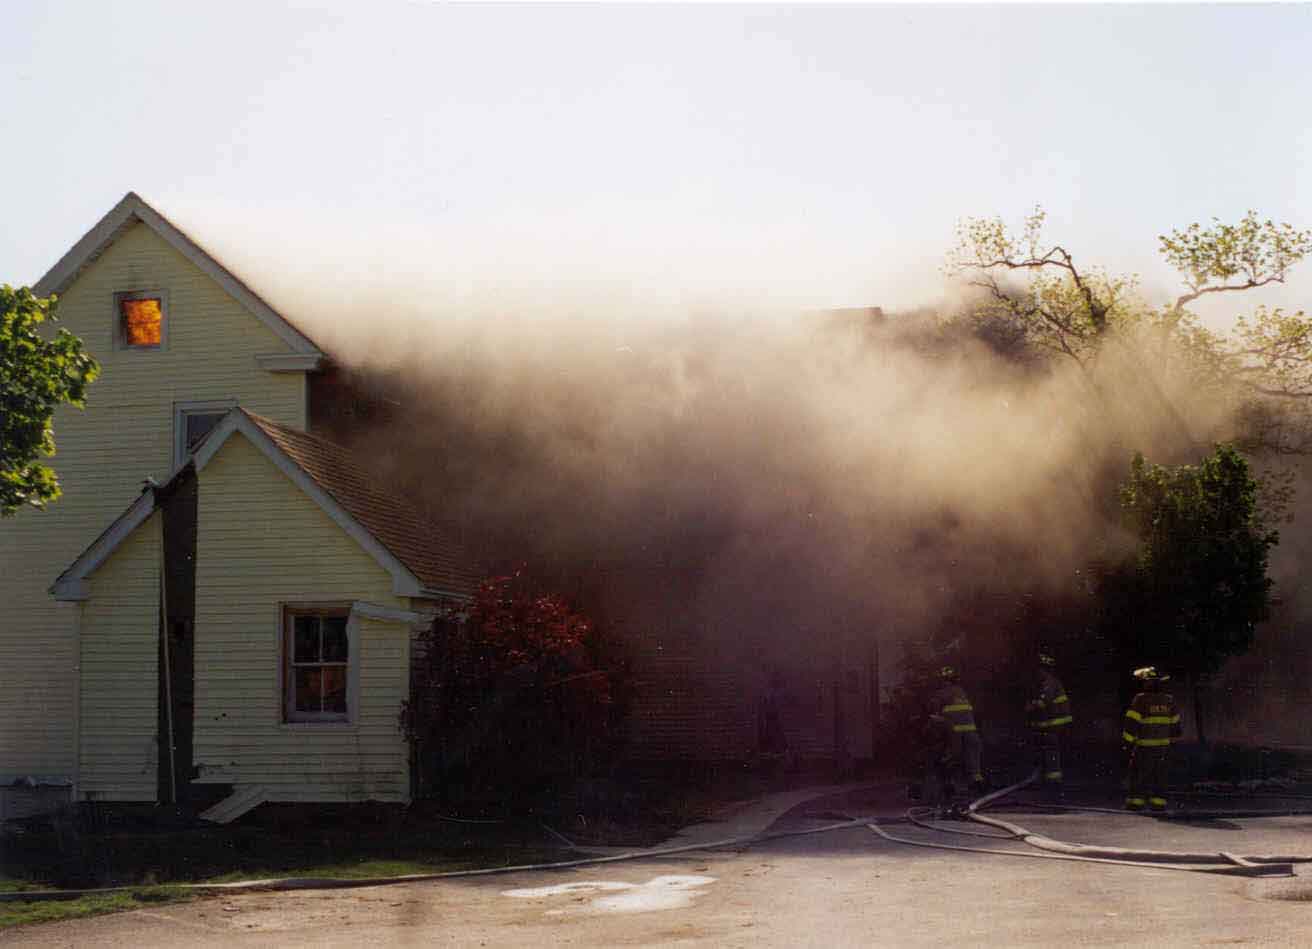 Photograph of the burning structure, with three fire fighters manning hoselines.